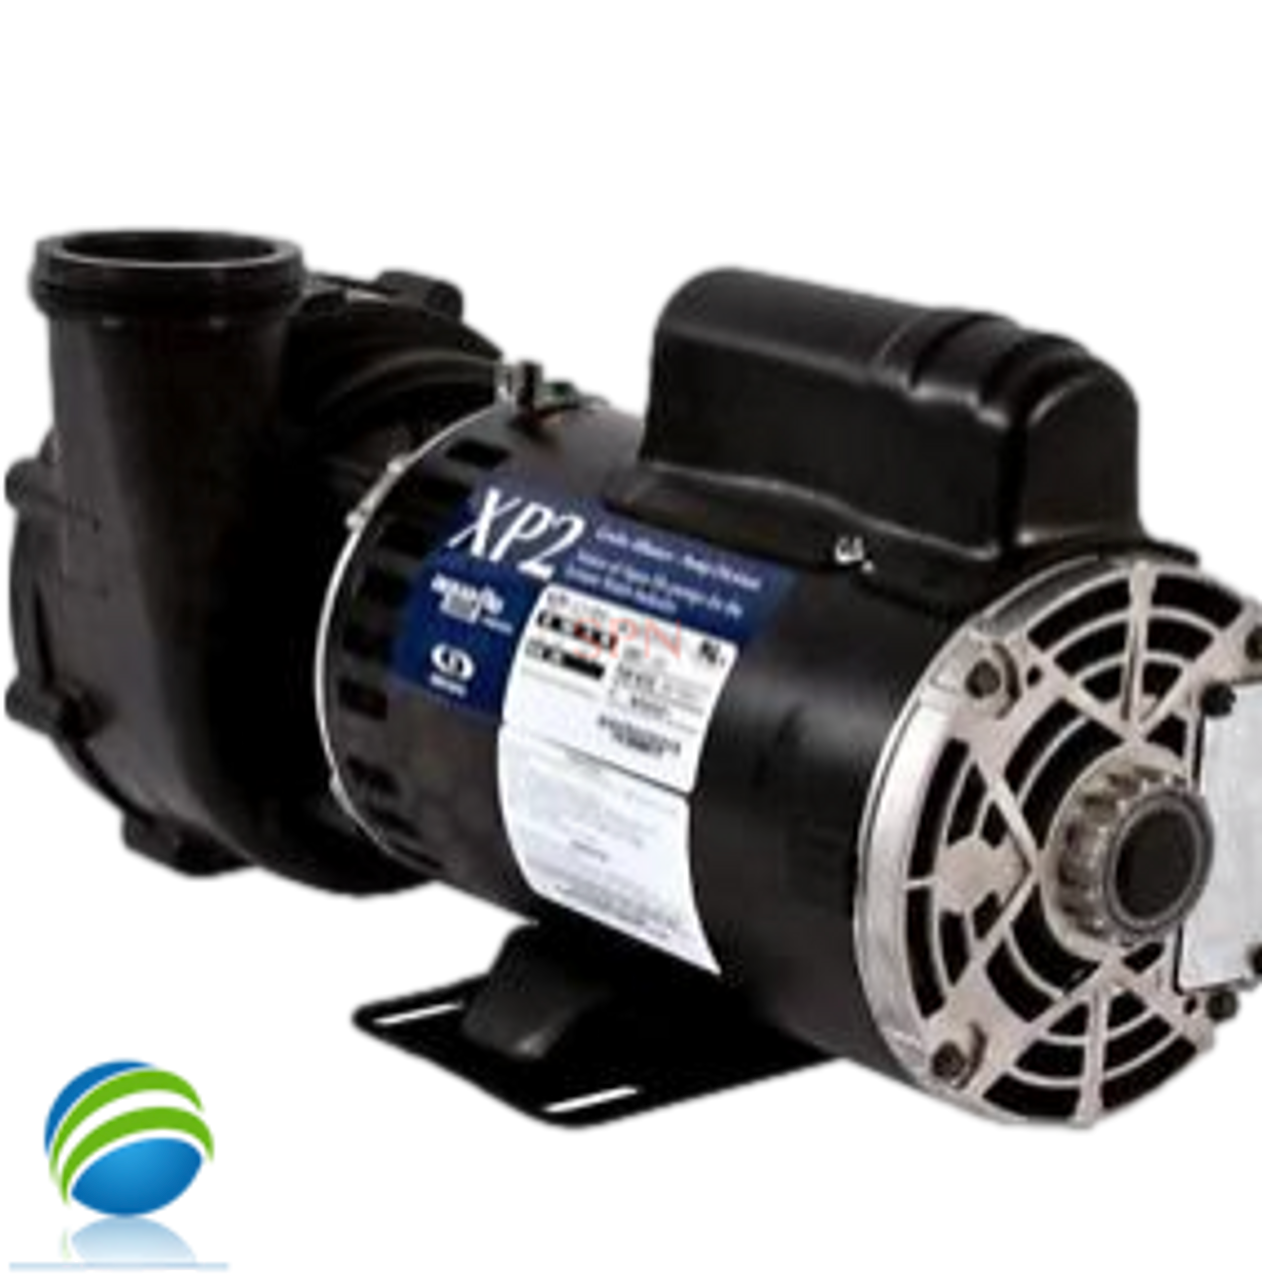 Hot Spring, Watkins, Pump, Vendor Code 4081, 72196, 73023, 2.5HP, 230v,2-spd, 48frame
The Suction and Pressure side of this pump measures about 3" edge to edge across the threads..